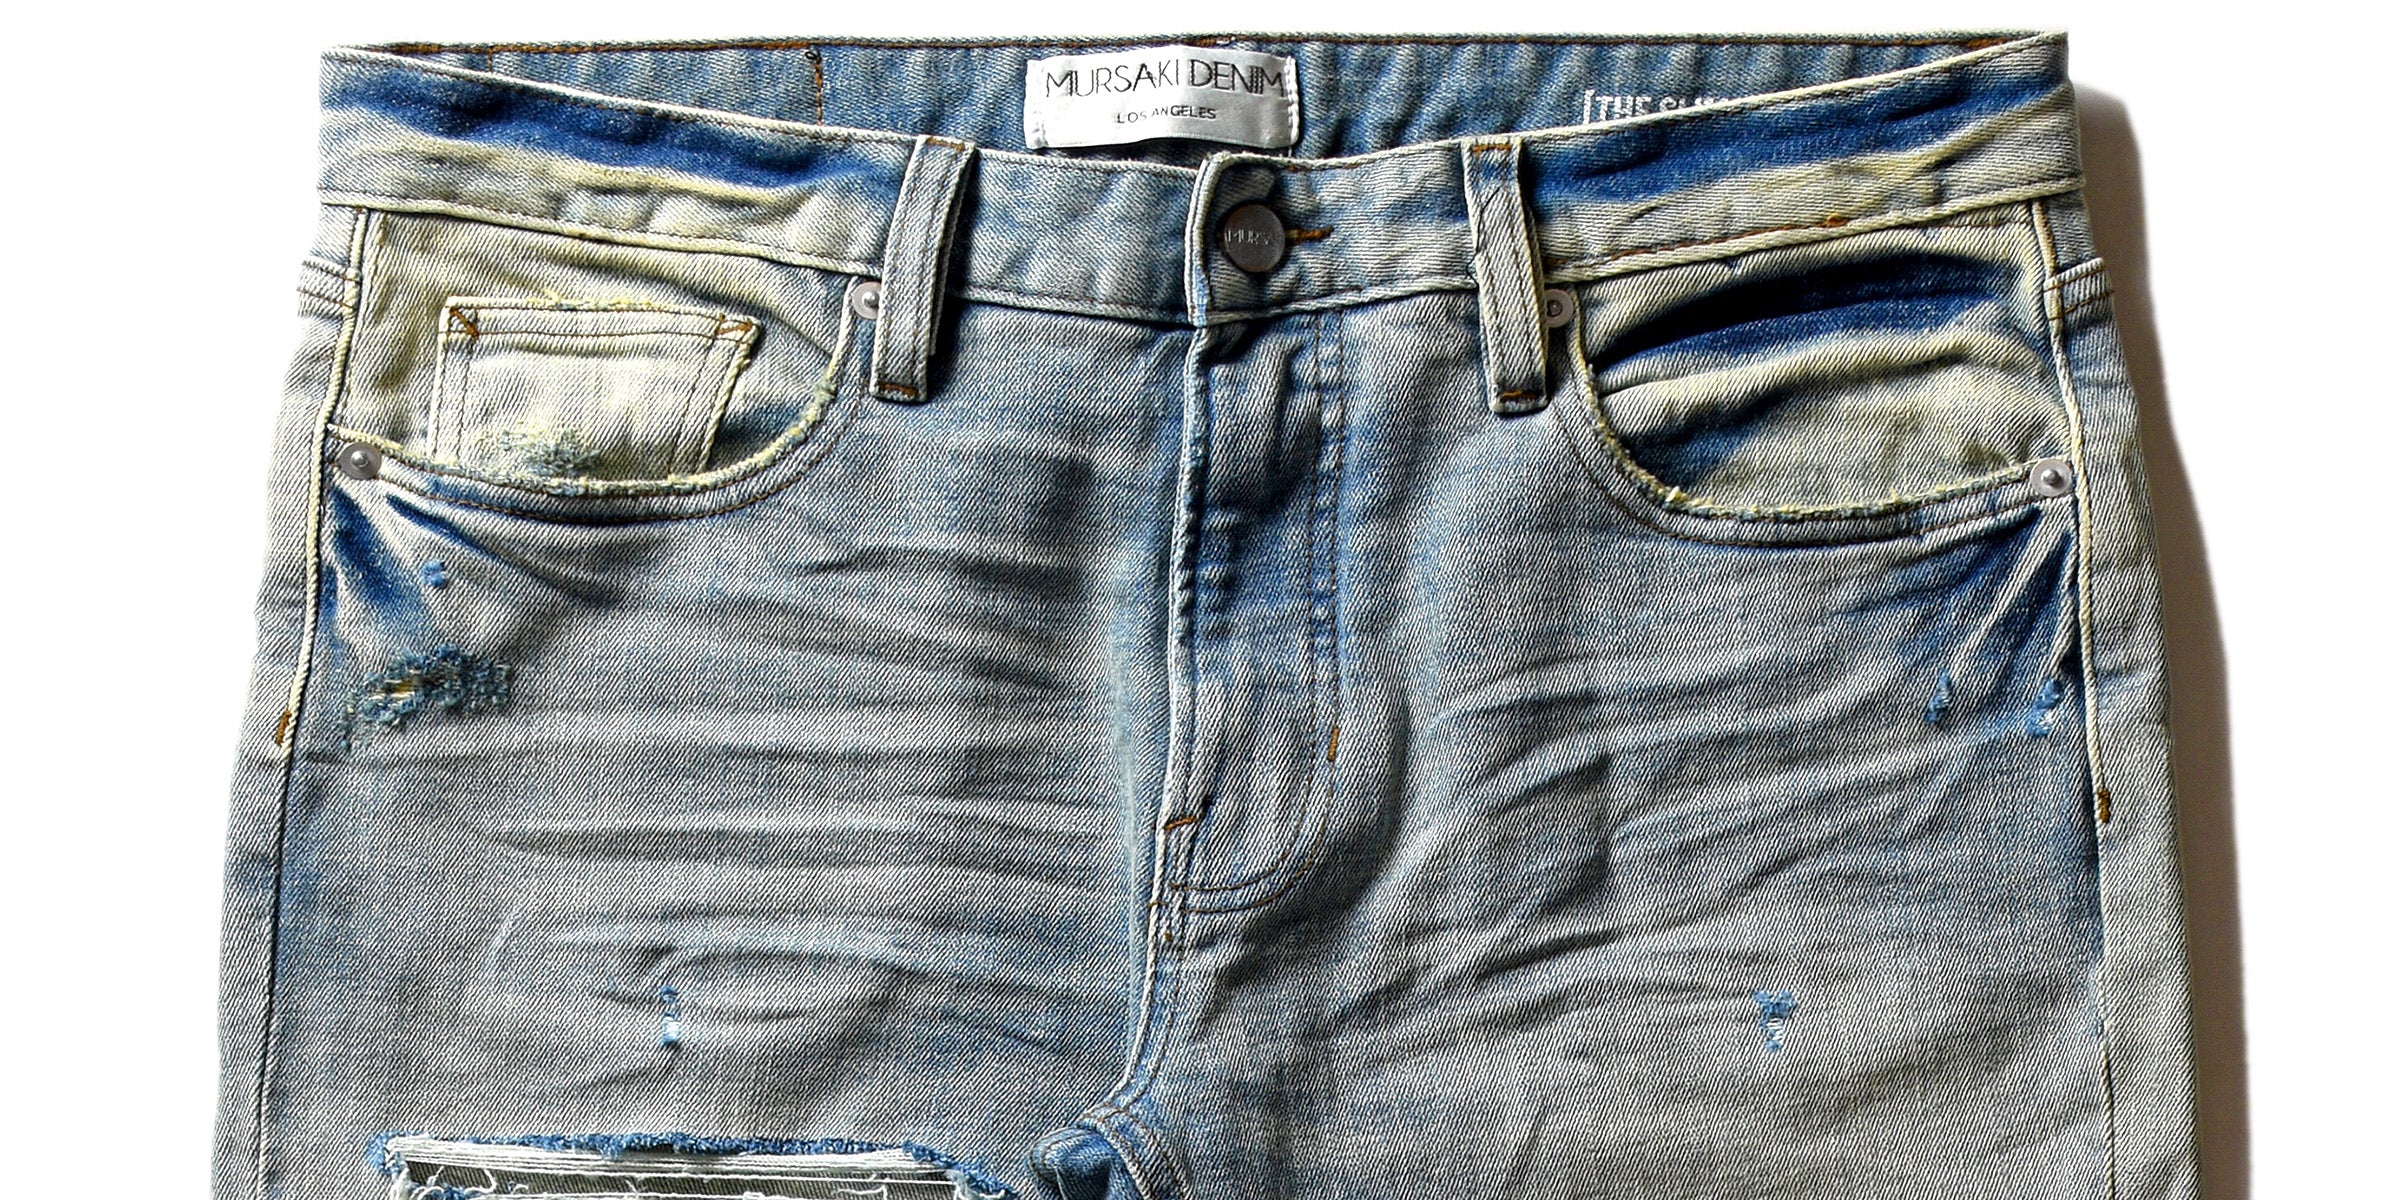 UB201 3.5 years of wear, before and after their first wash. : r/rawdenim